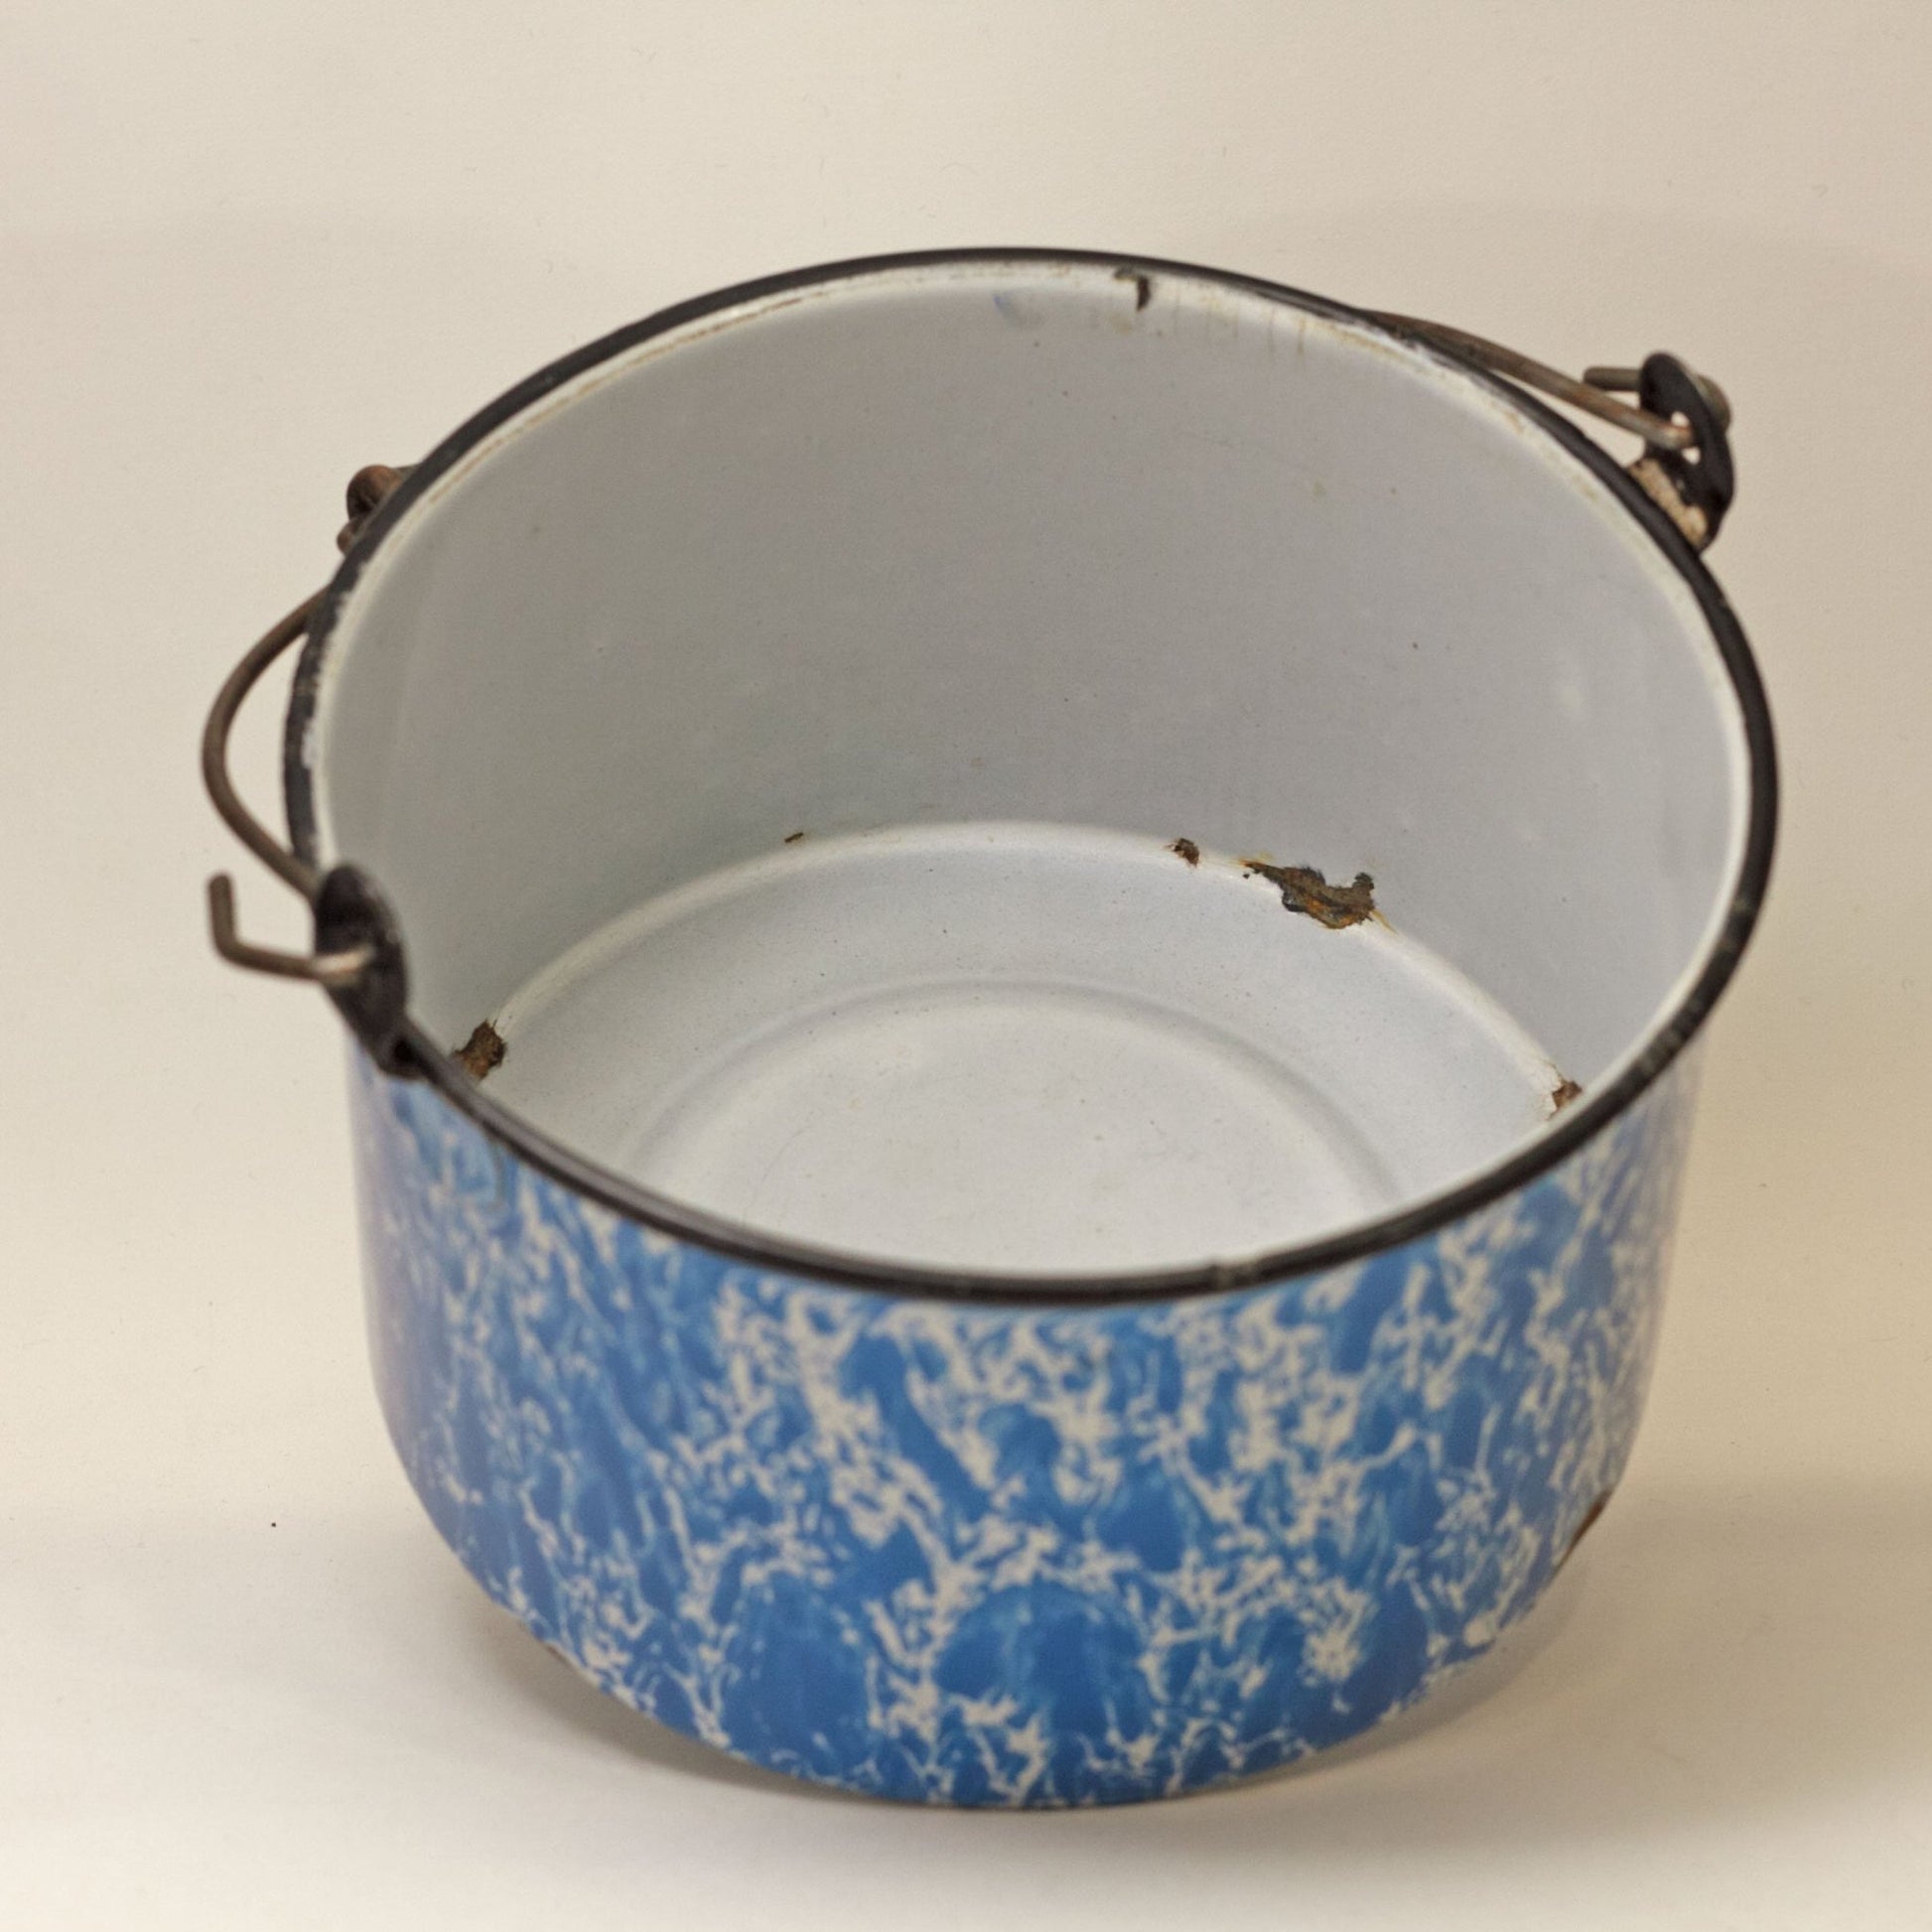 GRANITEWARE WATER PAIL with Lid Blue and White Swirl Circa 1880 - 1920